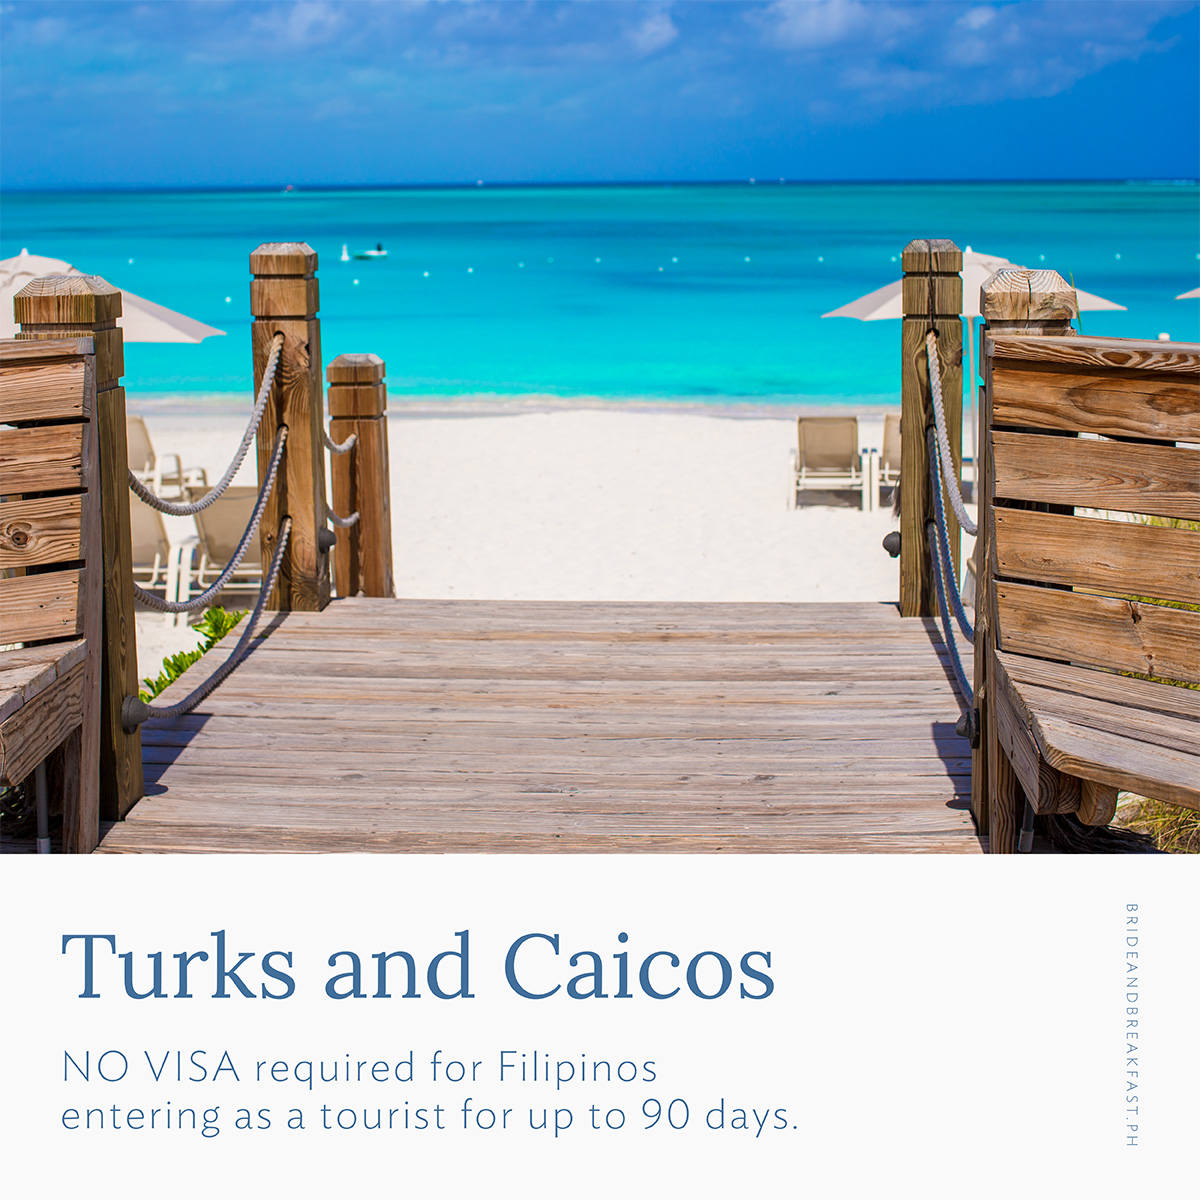 TURKS AND CAICOS Visa Requirement: NO VISA required for Filipinos entering as a tourist for up to 90 days.